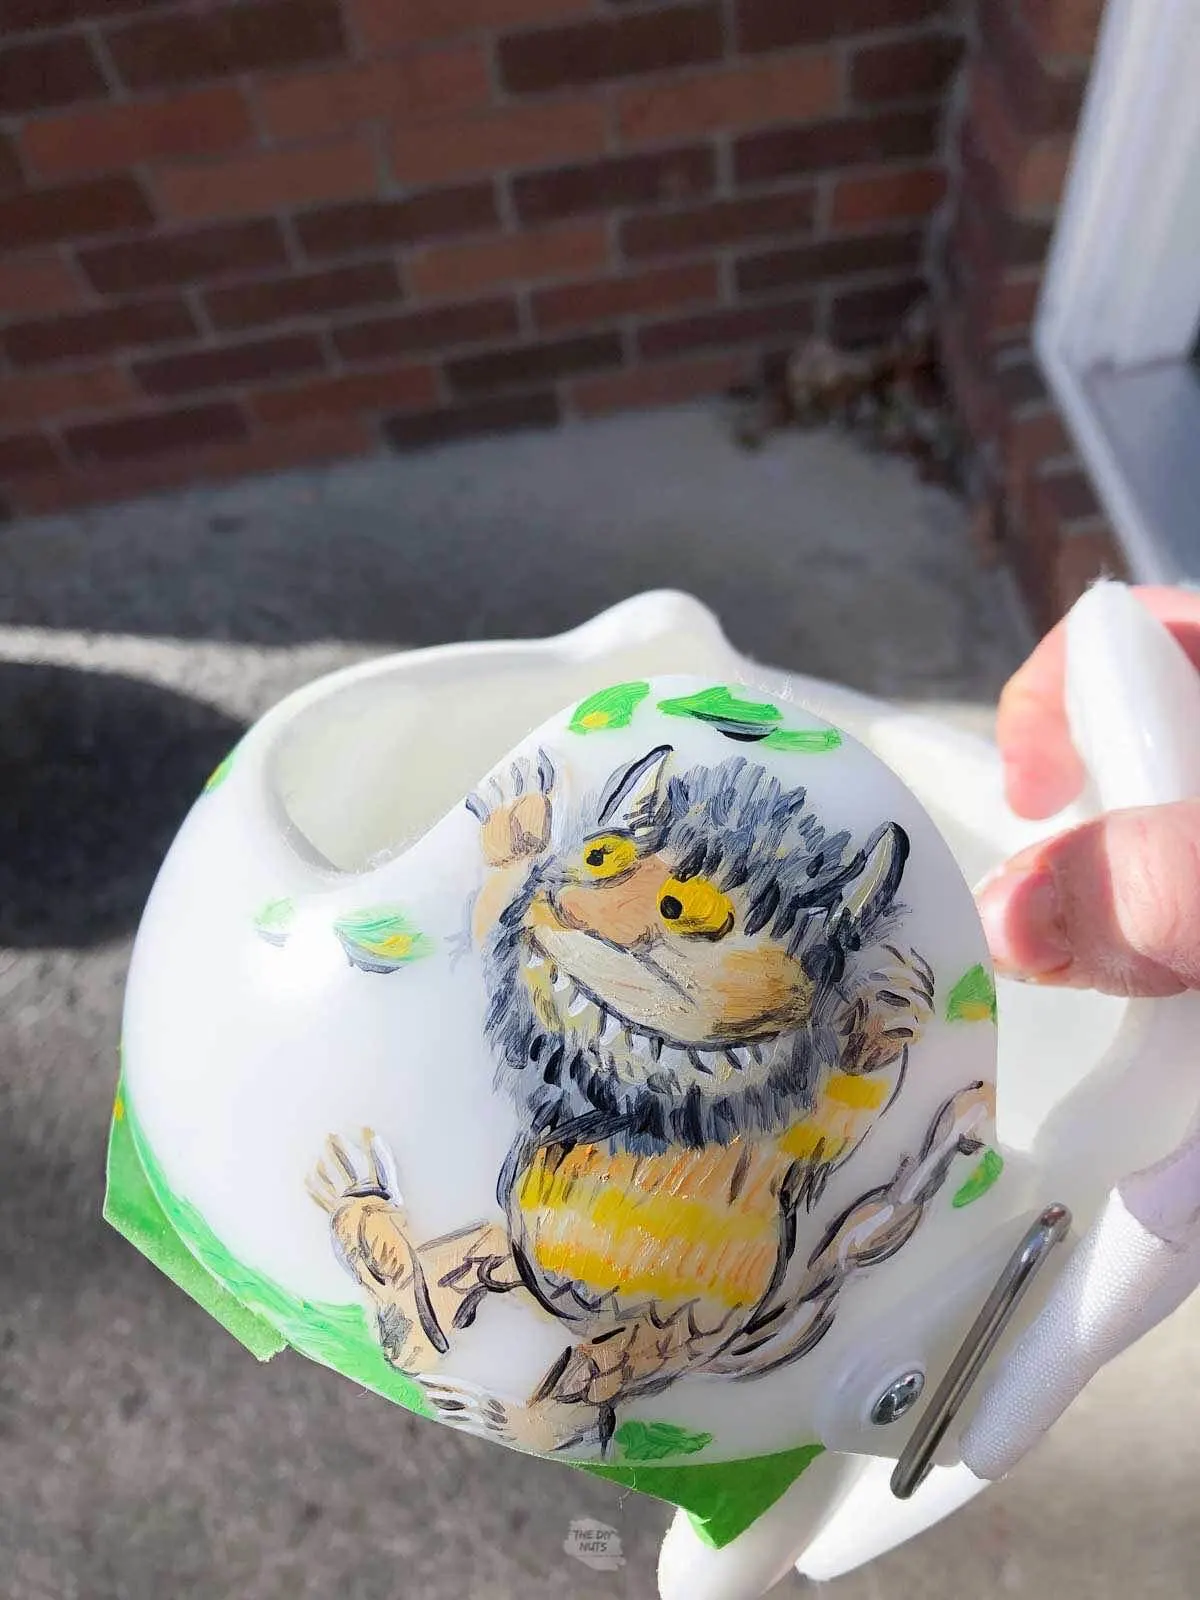 hand holding baby helmet with wild thing monster painted on the side.